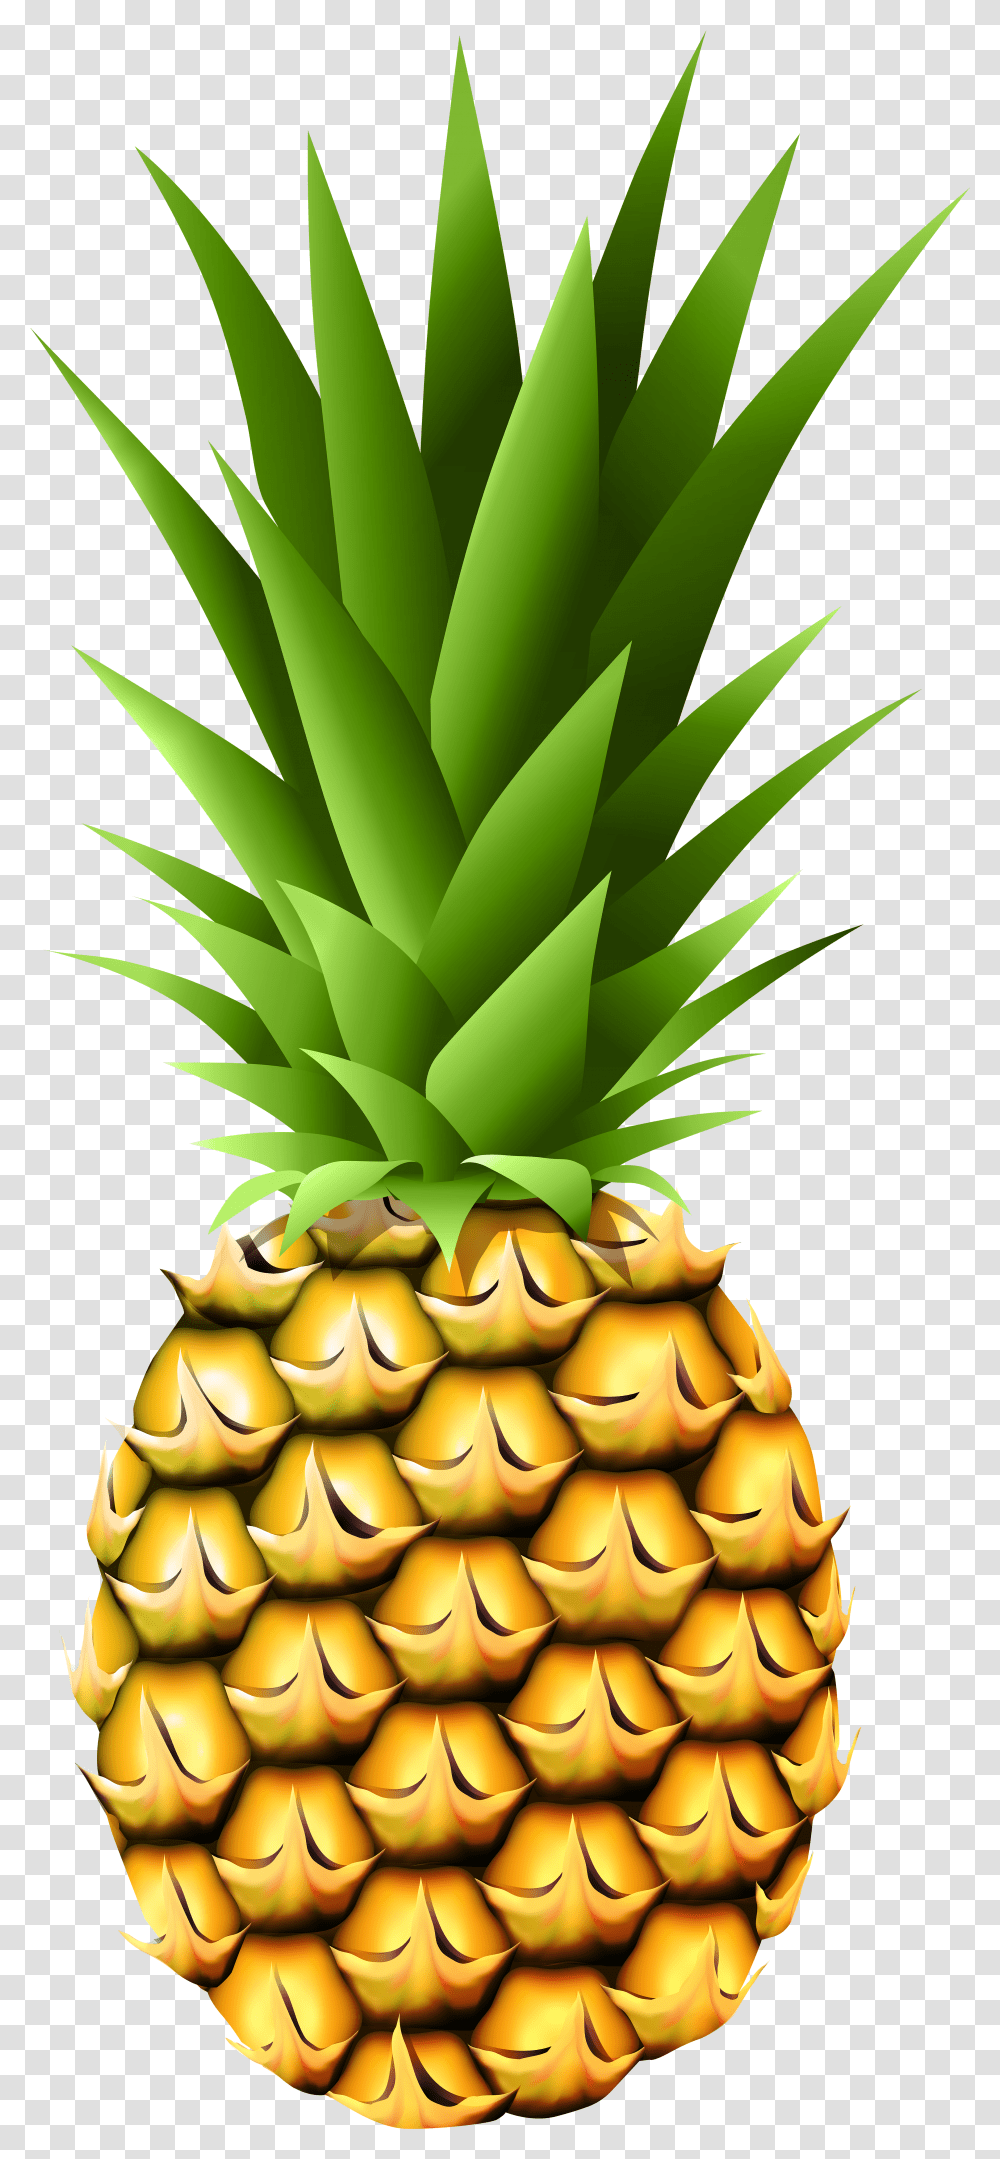 Fruits Pineapple Pineapple Background Transparent Png